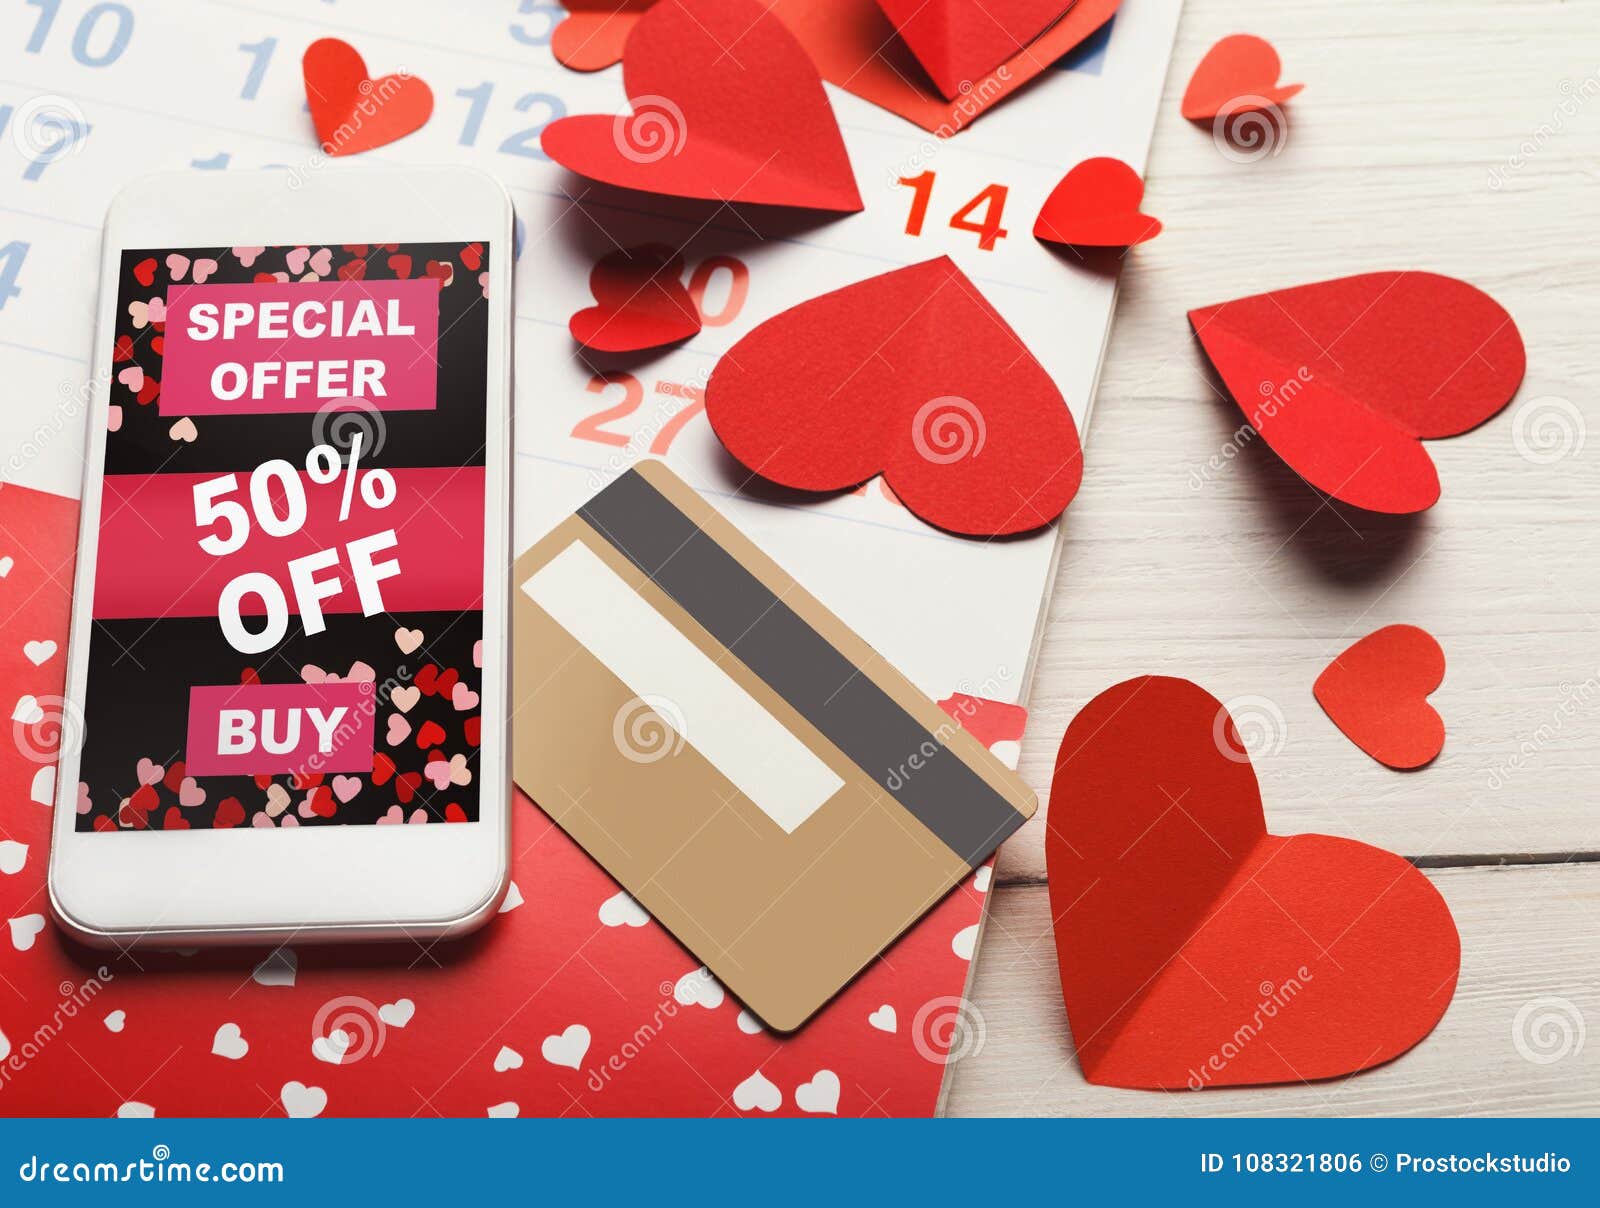 32 Valentine's Day Marketing Ideas Your Customers Will